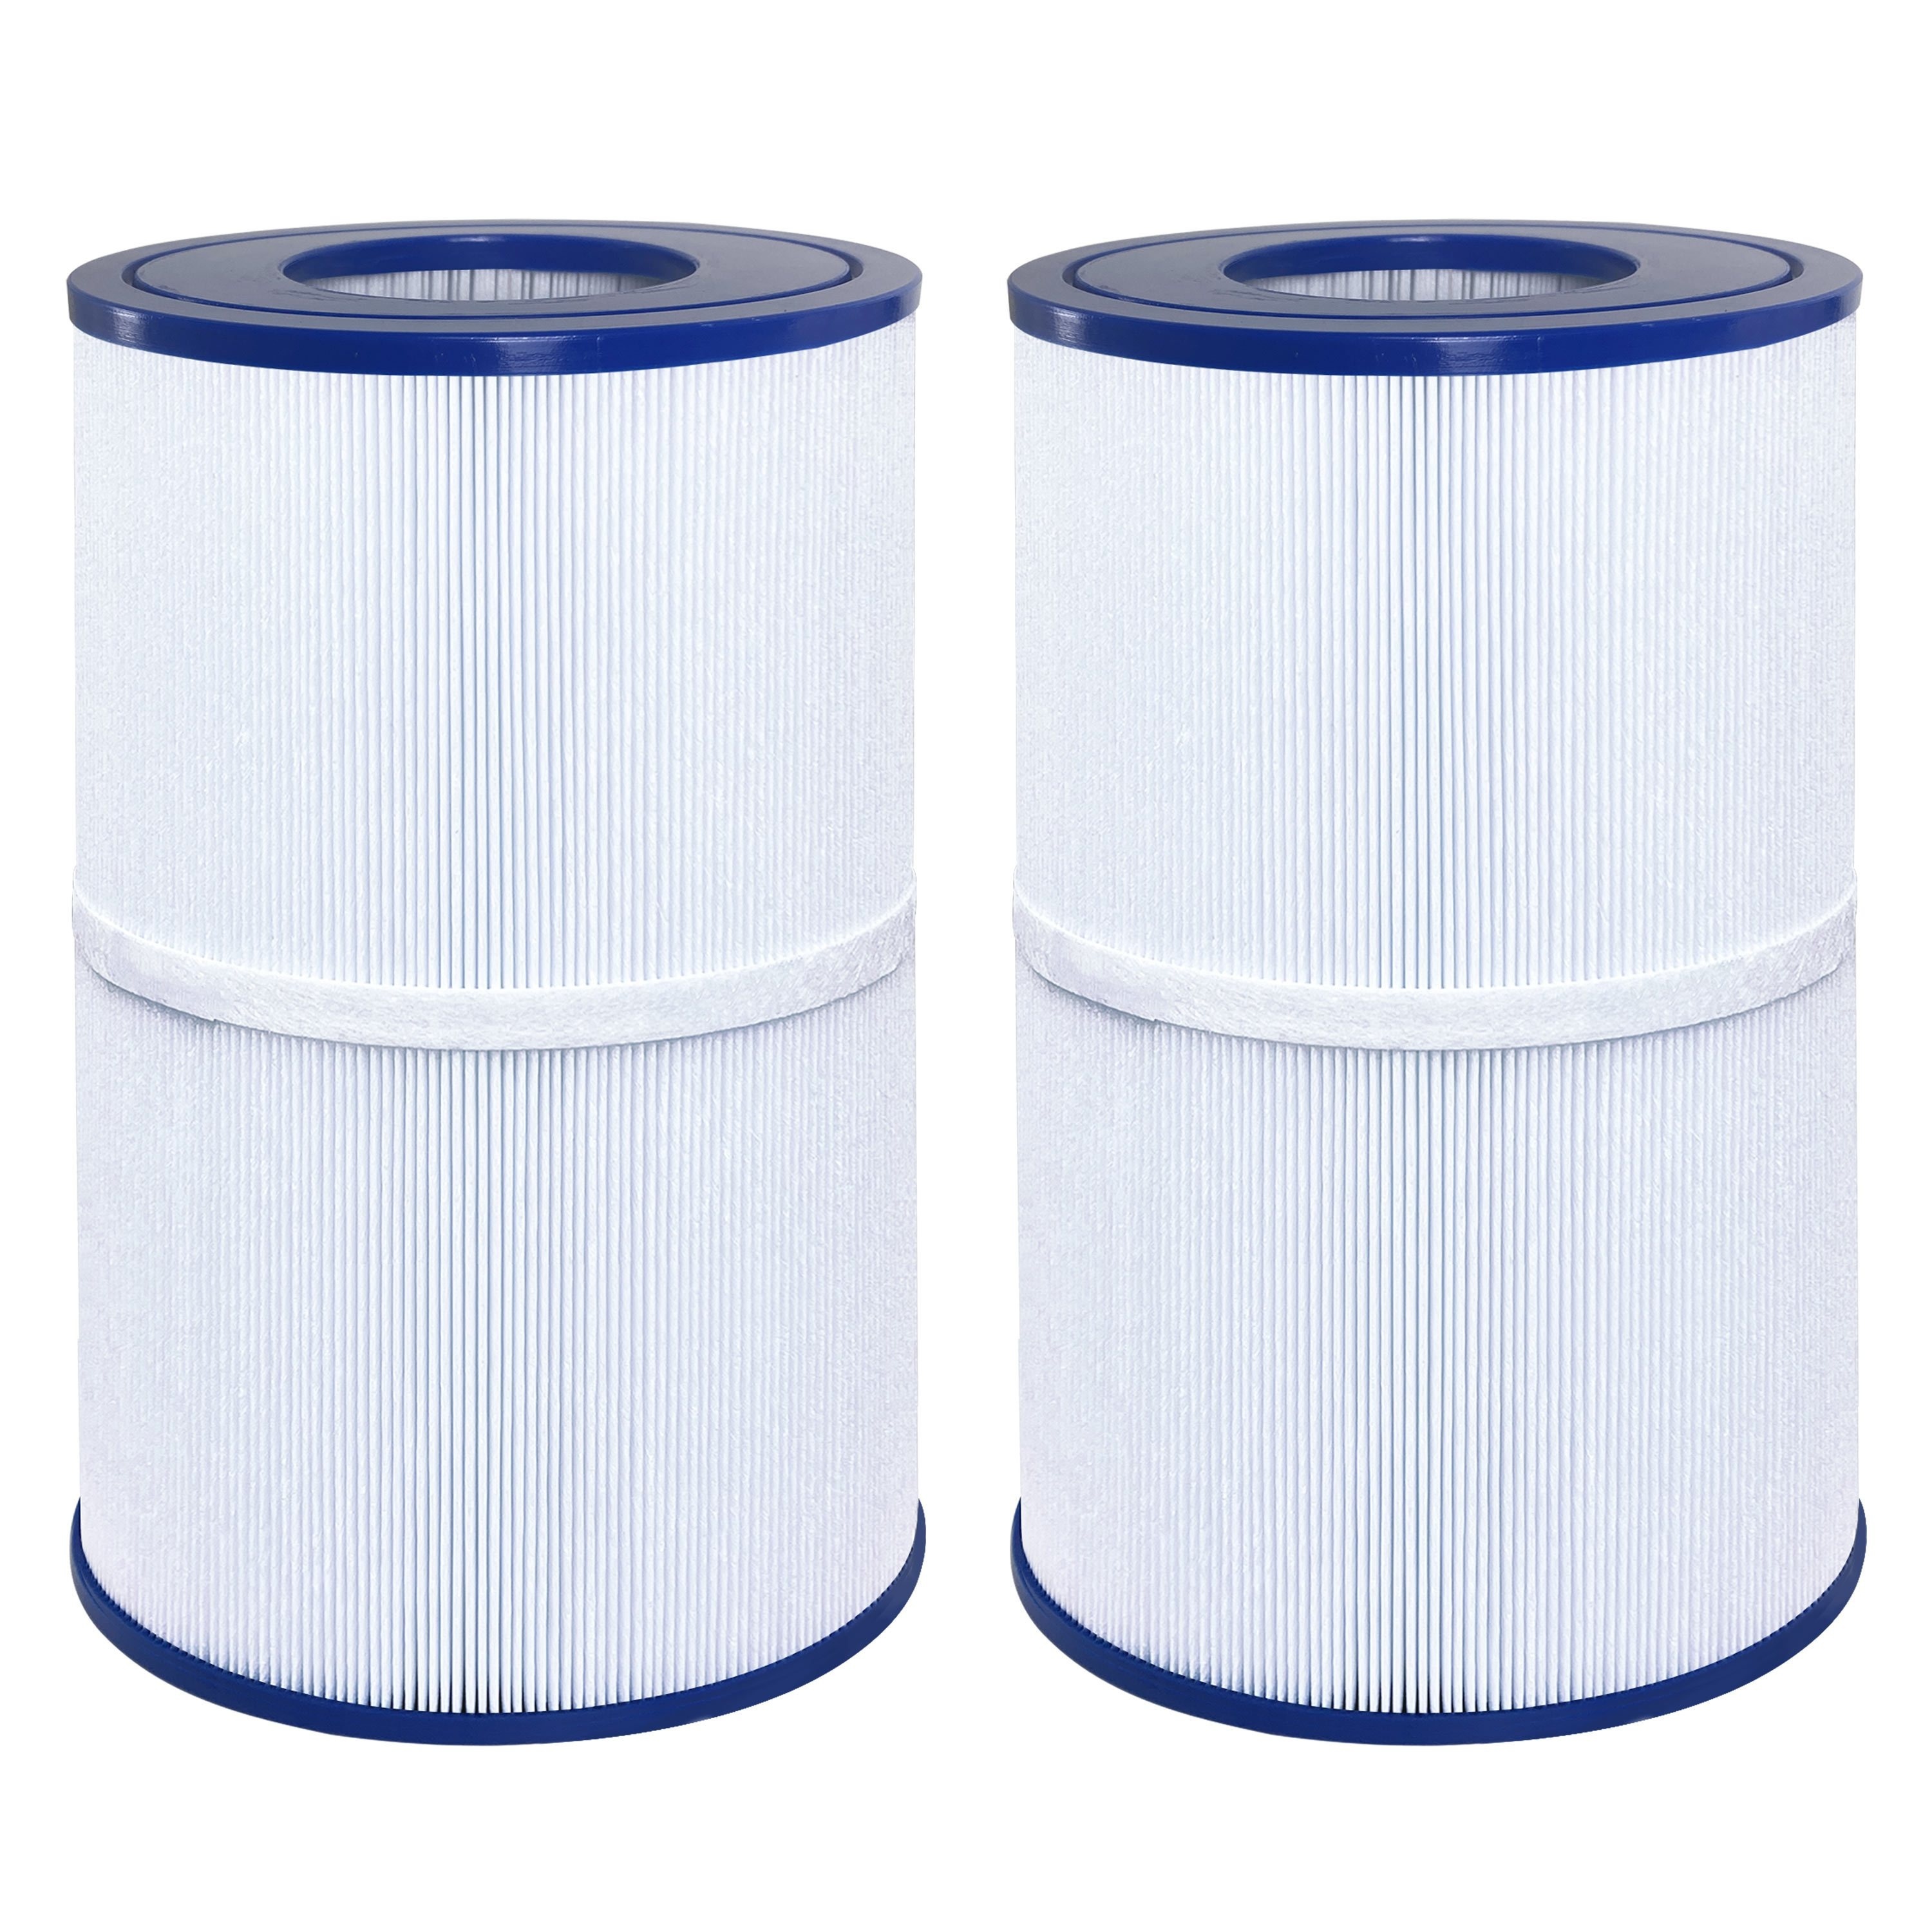 

Spa Filter Compatible With Pdm 30, 461269, Fc9940m. Oval-shaped Filter Cartridge. 2013+ : Odyssey, Big Ez, , Ezl, Fantasy. Crossover: 730l, 730s, 2 Pack